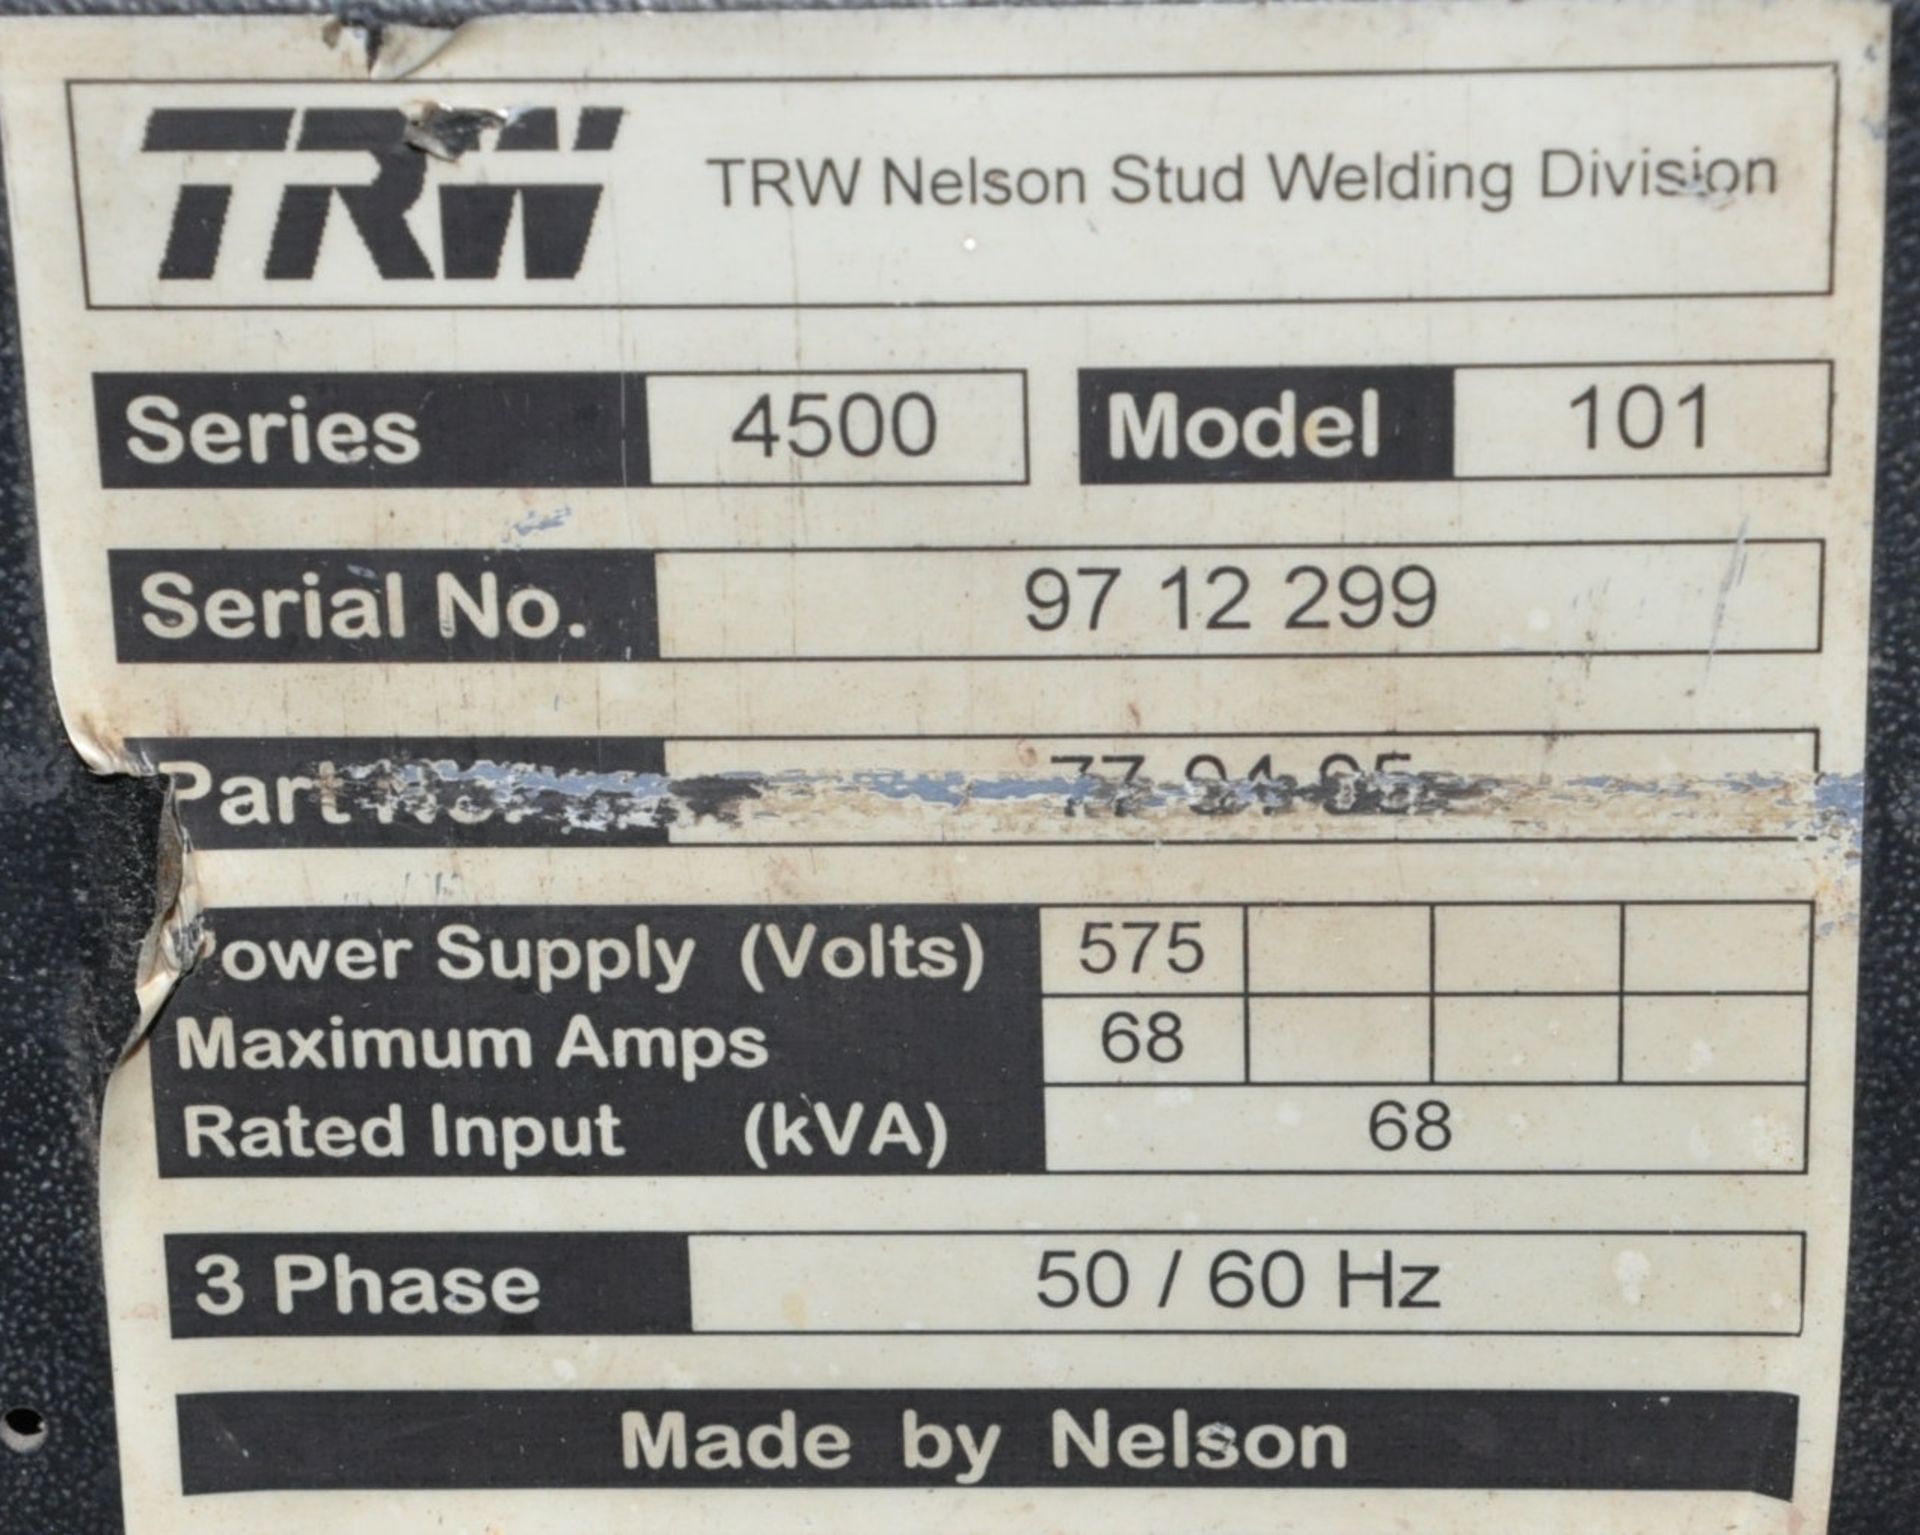 TRW Nelson Series 4500, Model 101 Stud Welding System, 3-PH, with Gun and Leads - Image 2 of 2